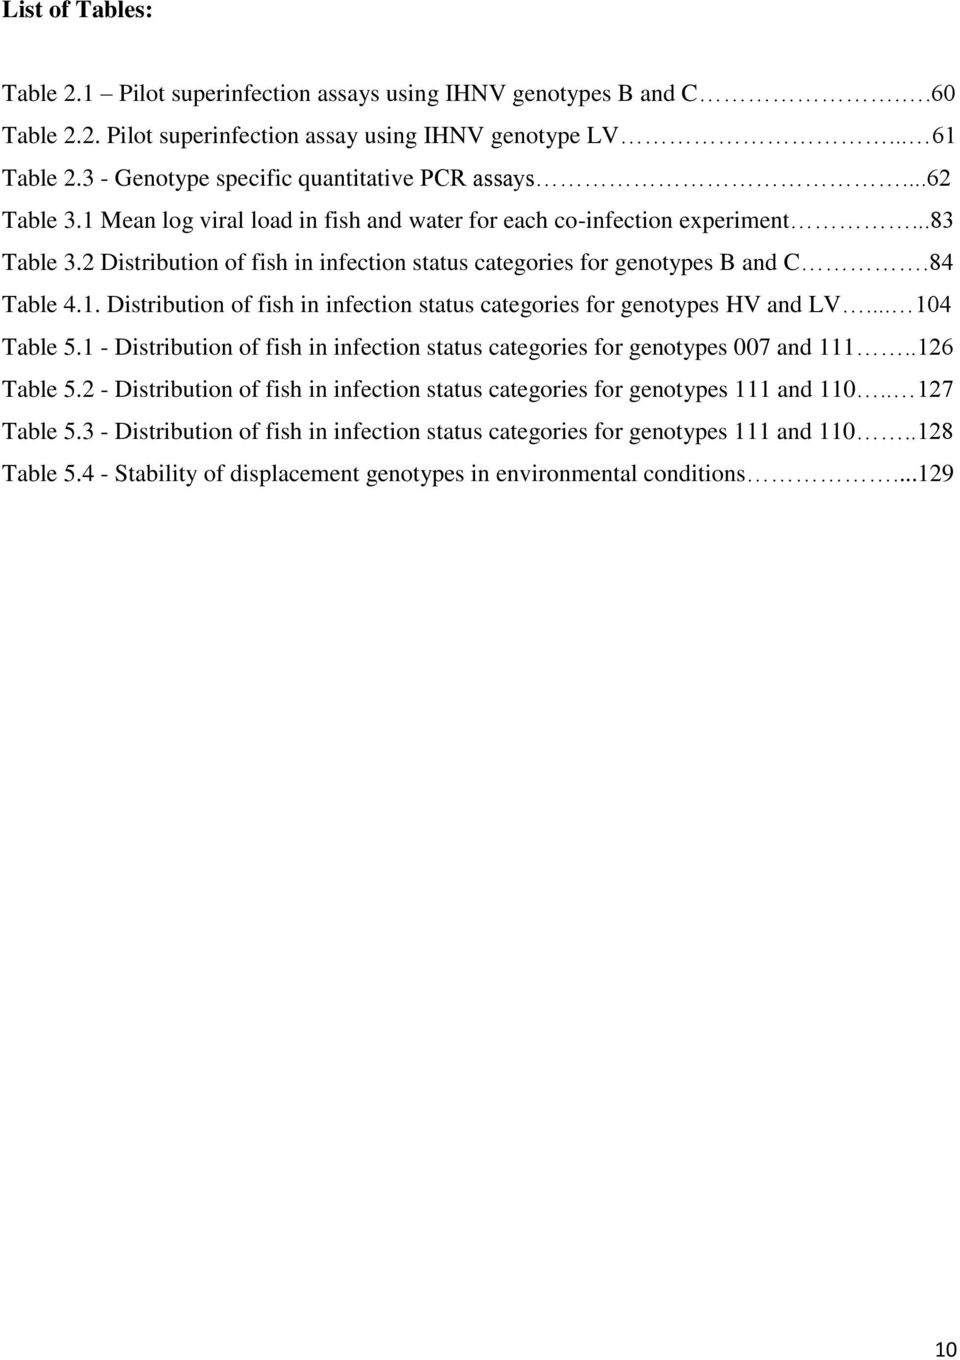 2 Distribution of fish in infection status categories for genotypes B and C.84 Table 4.1. Distribution of fish in infection status categories for genotypes HV and LV... 104 Table 5.